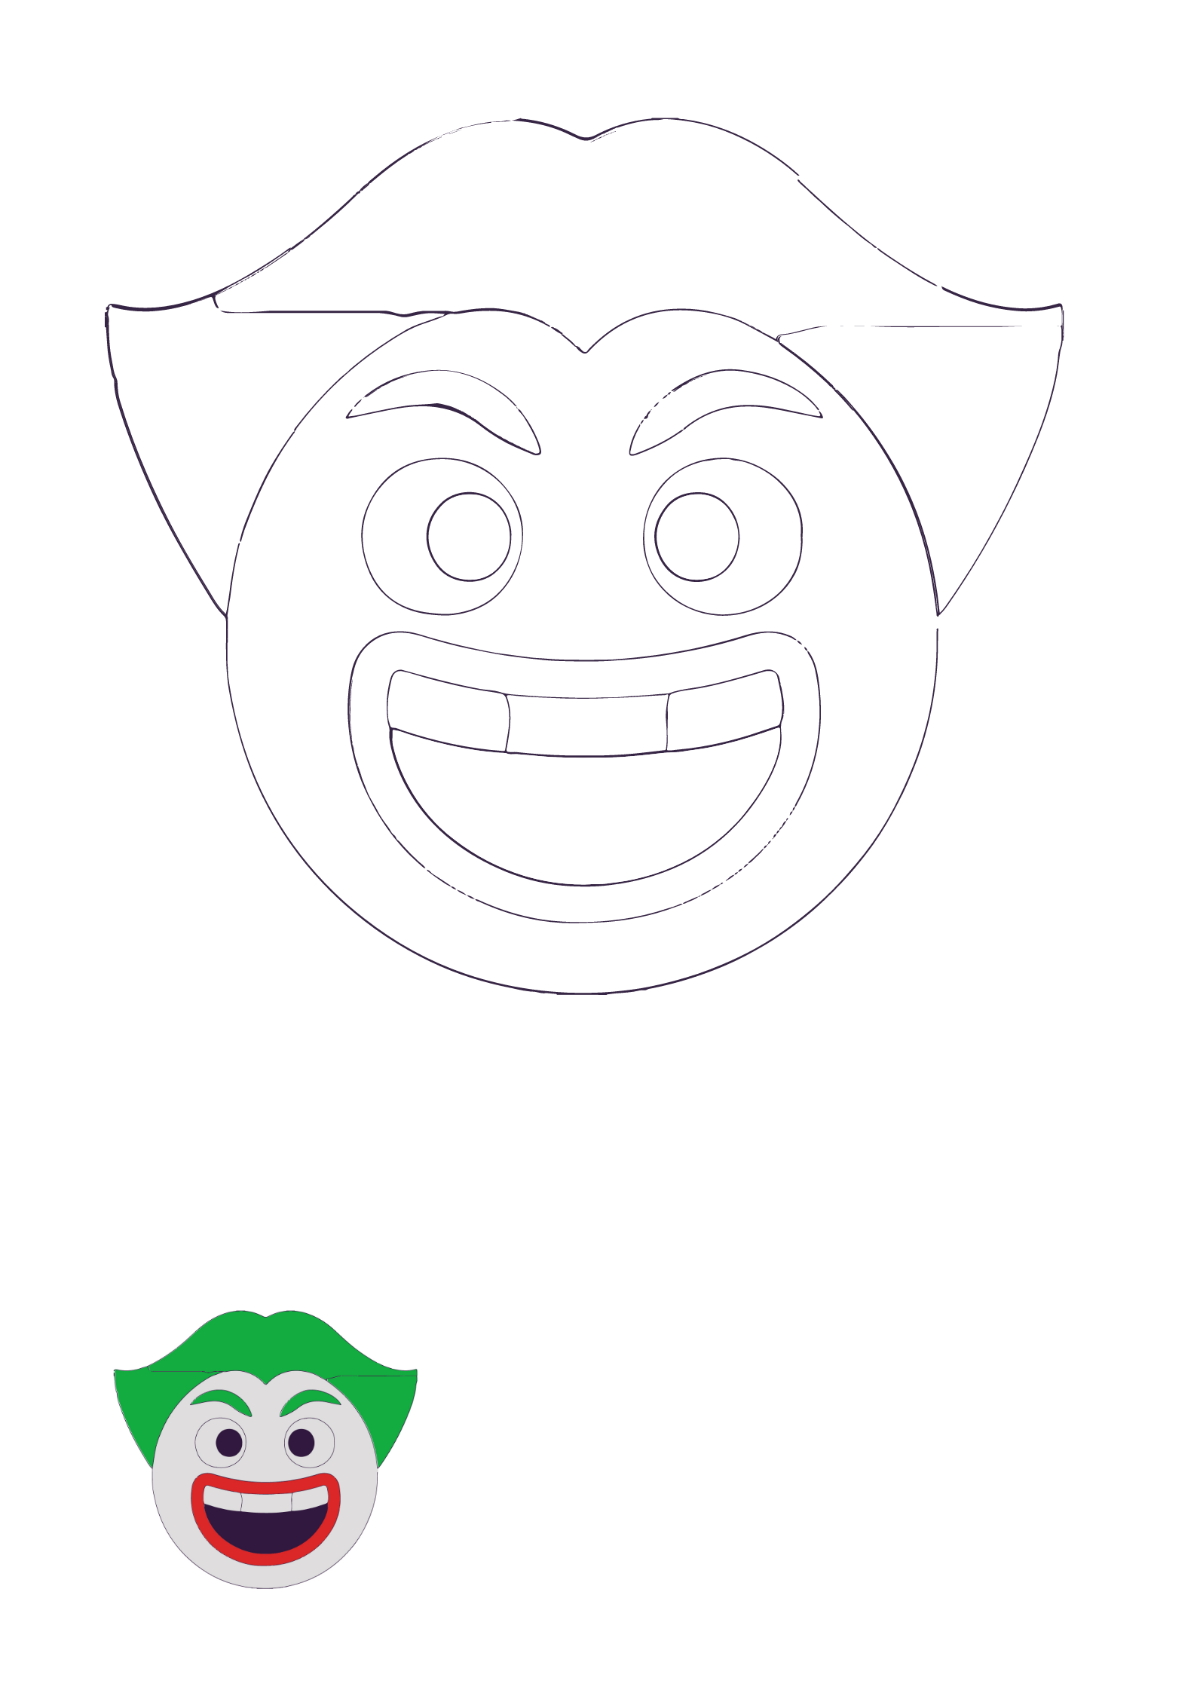 Free Joker Smiley Coloring Page Template